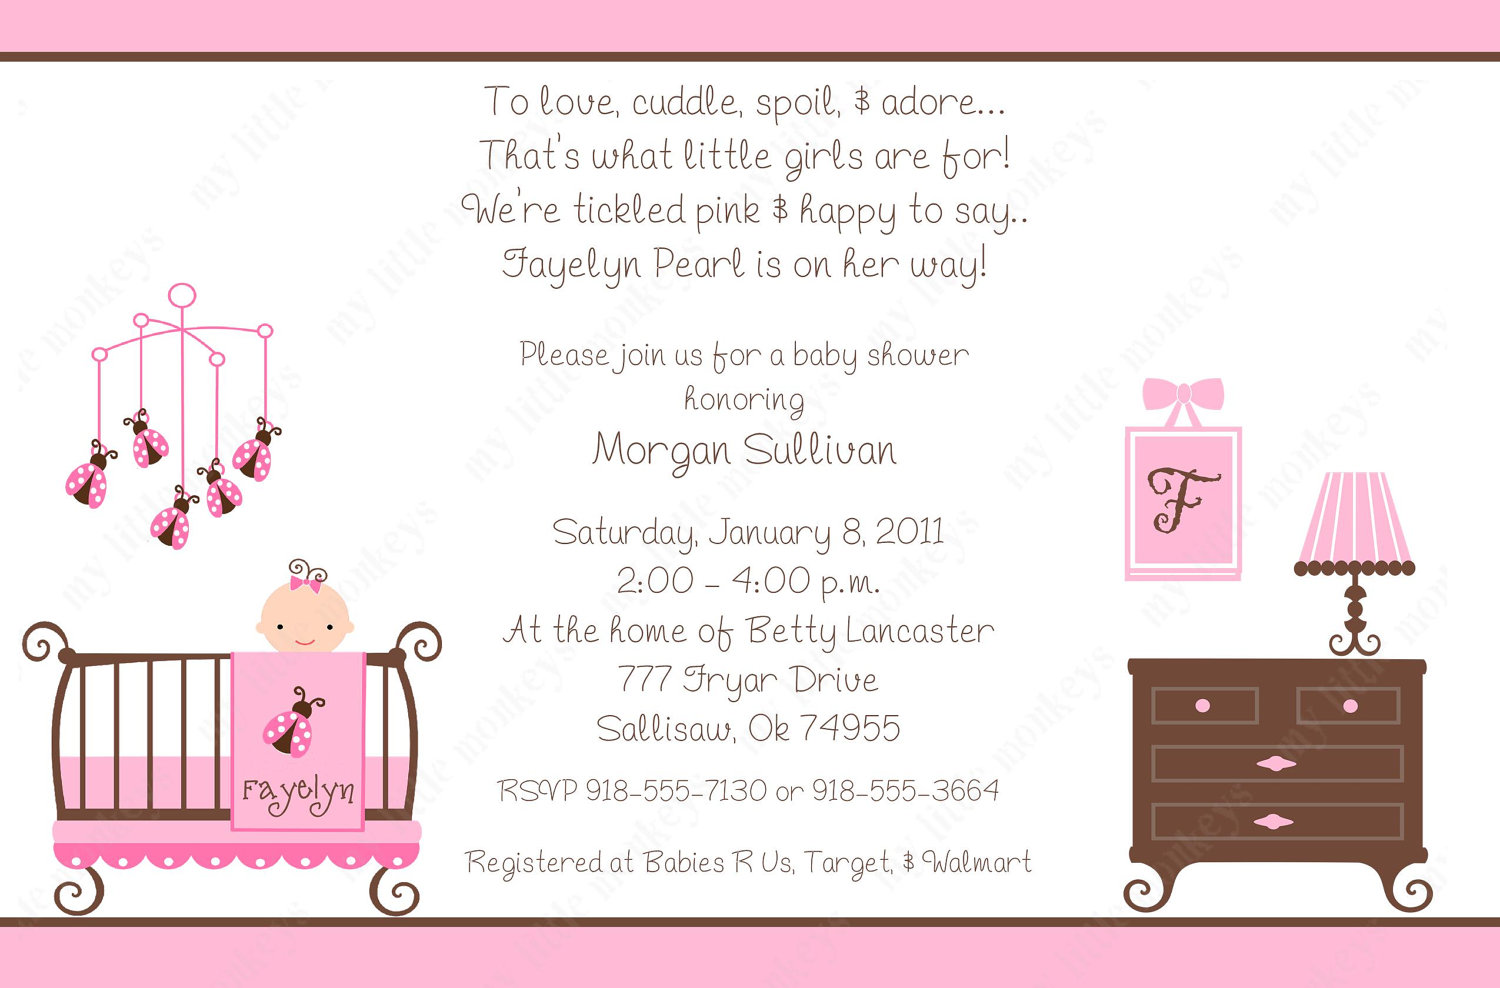 Full Size of Baby Shower:nautical Baby Shower Invitations For Boys Baby Girl Themes For Bedroom Baby Shower Ideas Baby Shower Decorations Themes For Baby Girl Nursery Baby Girl Themes For Baby Shower Baby Shower Themes Baby Shower Ideas Baby Shower Decorations Printable Baby Shower Invitations For Girl